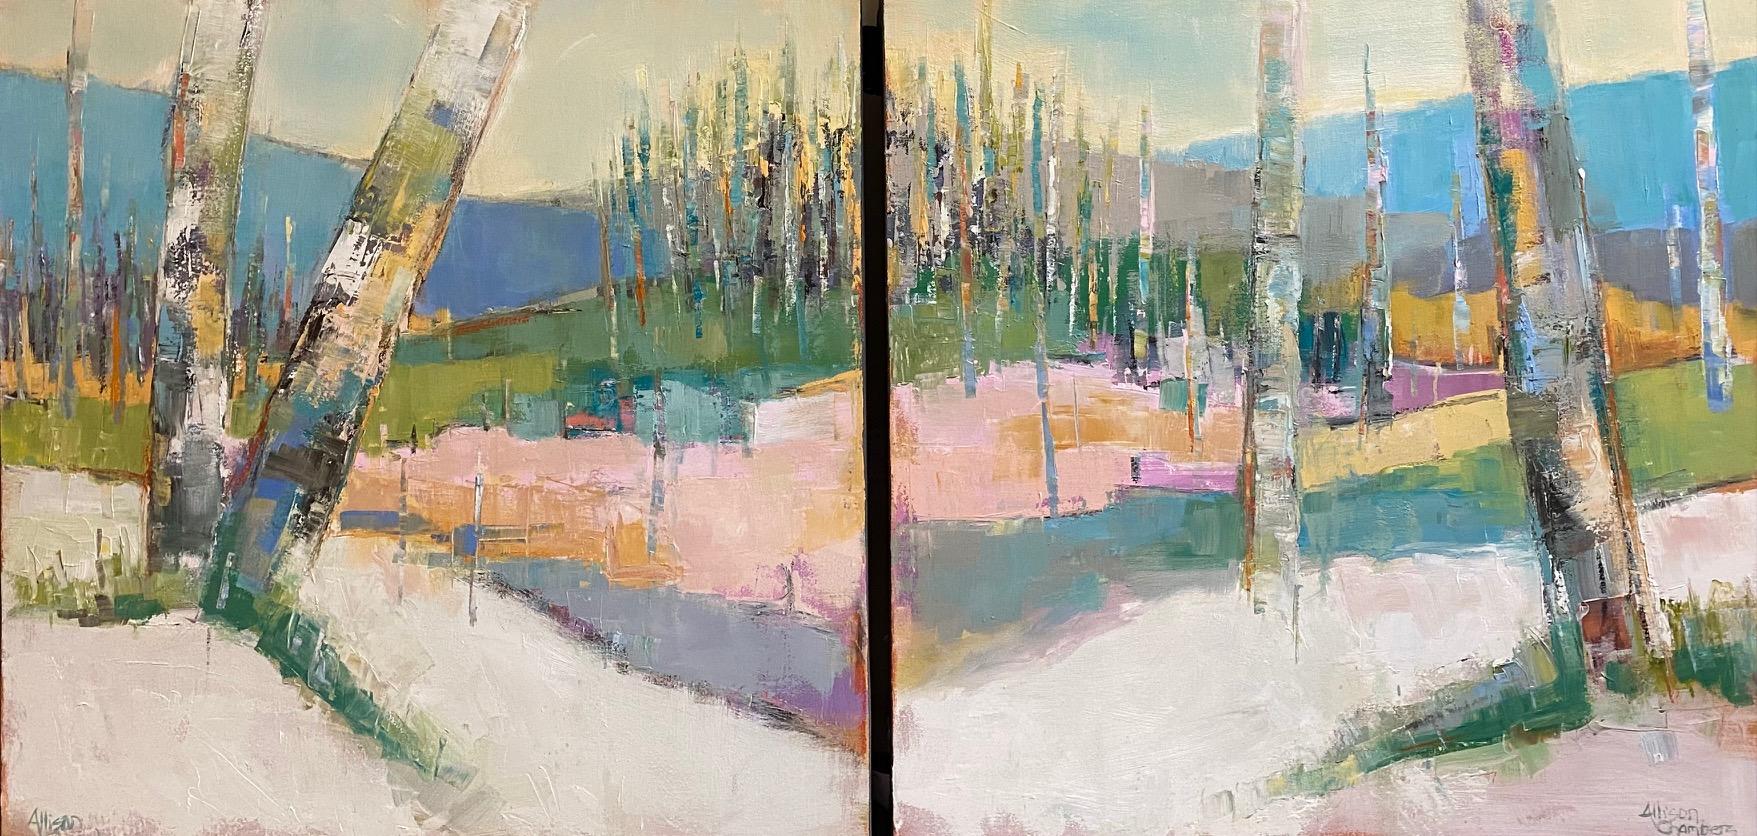 Allison Chambers Abstract Painting - Magic 1 and Magic 2 original 30x60 diptych abstract expressionist landscape